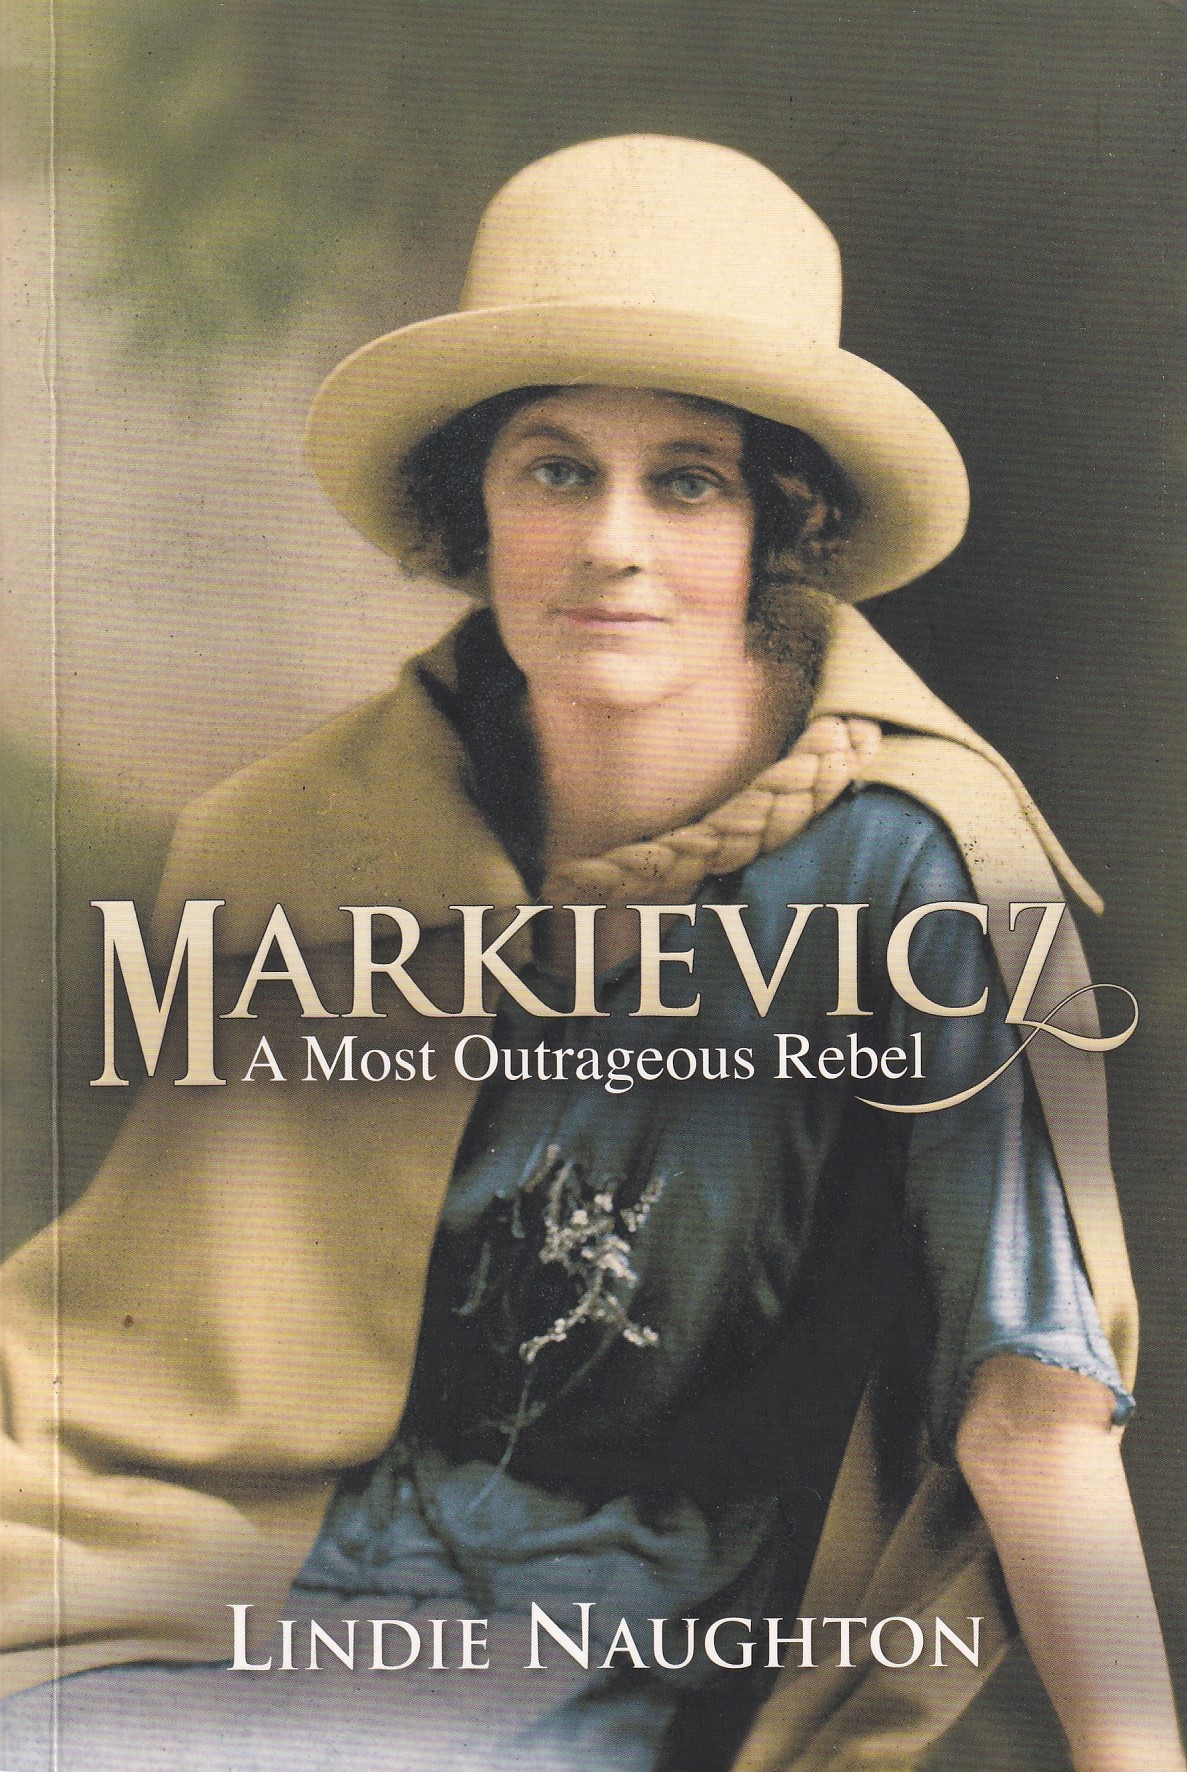 Markievicz A Most Outrageous Rebel by Naughton, Lindie